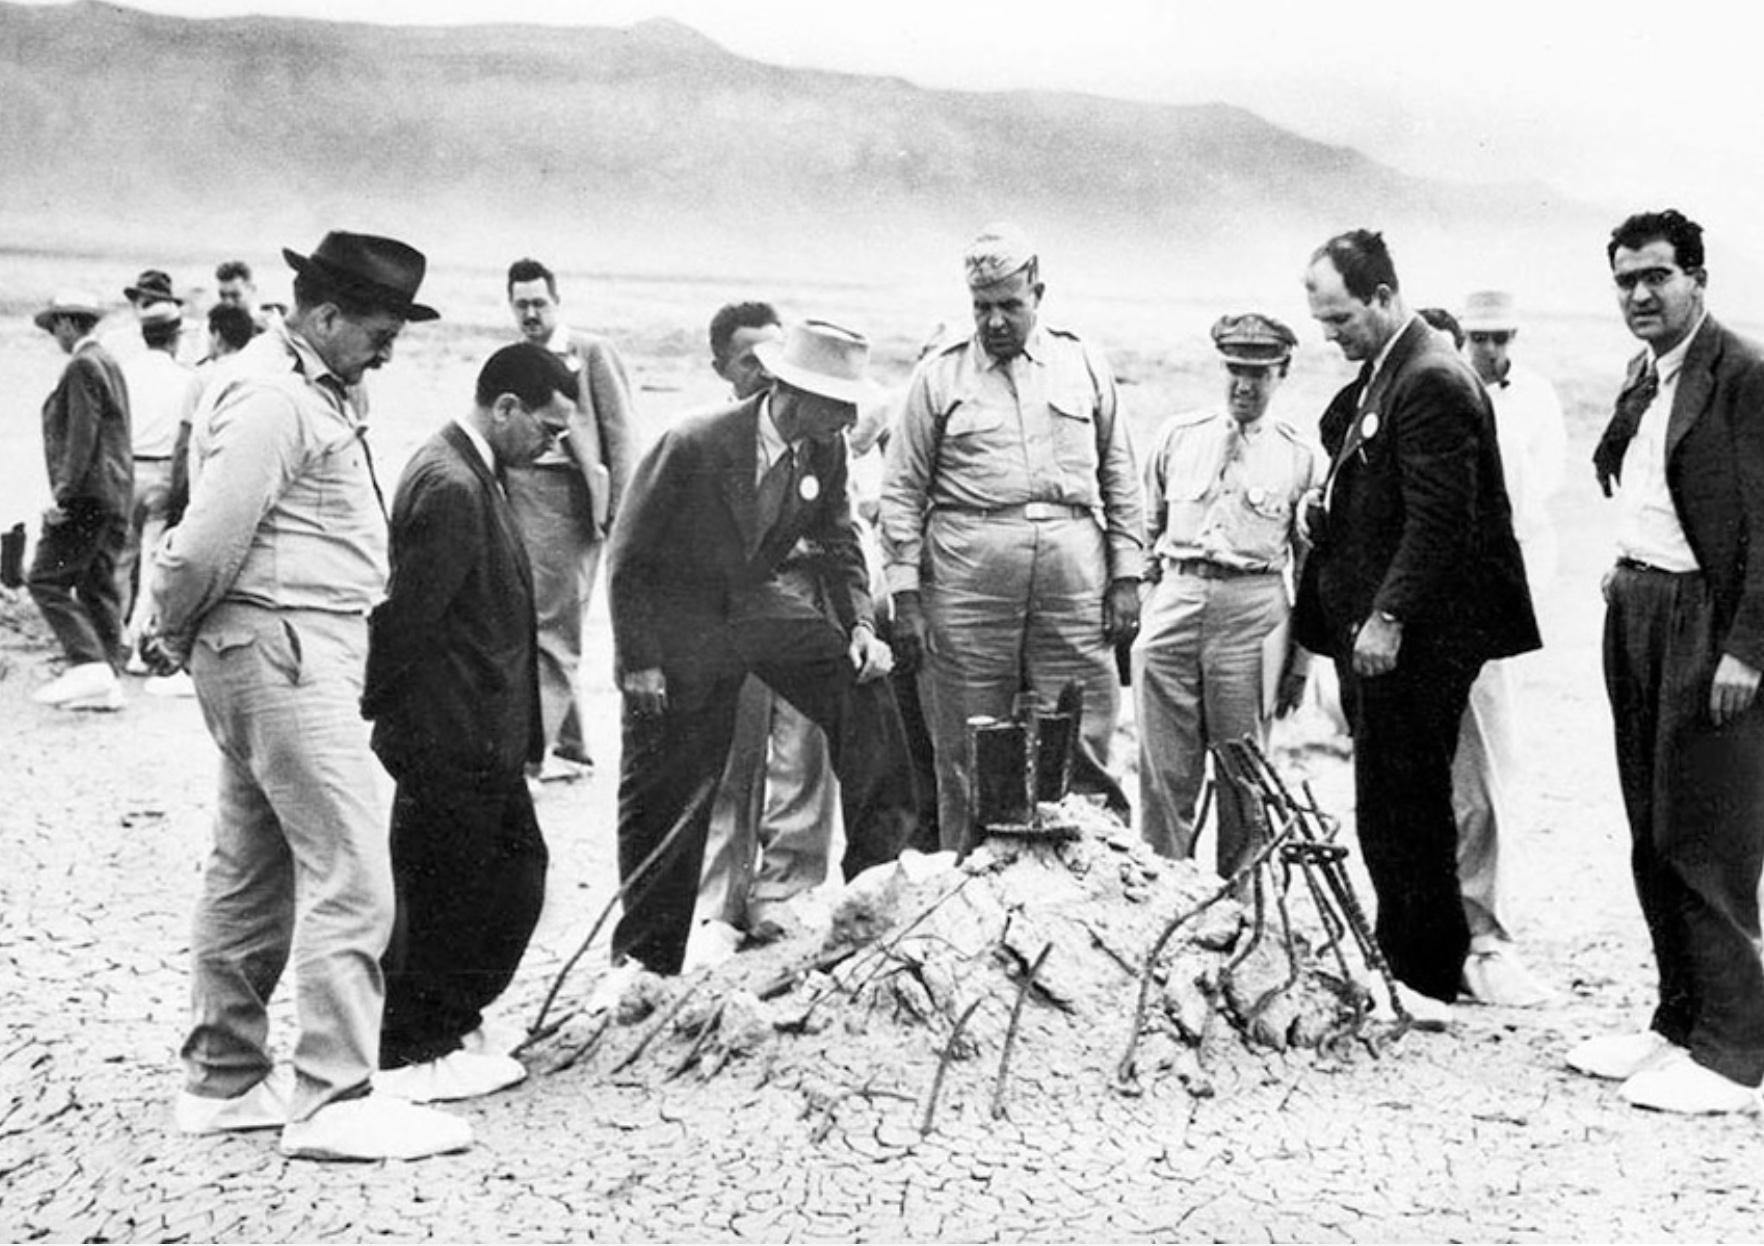 Group of men looking at a pile of rubble on the ground.